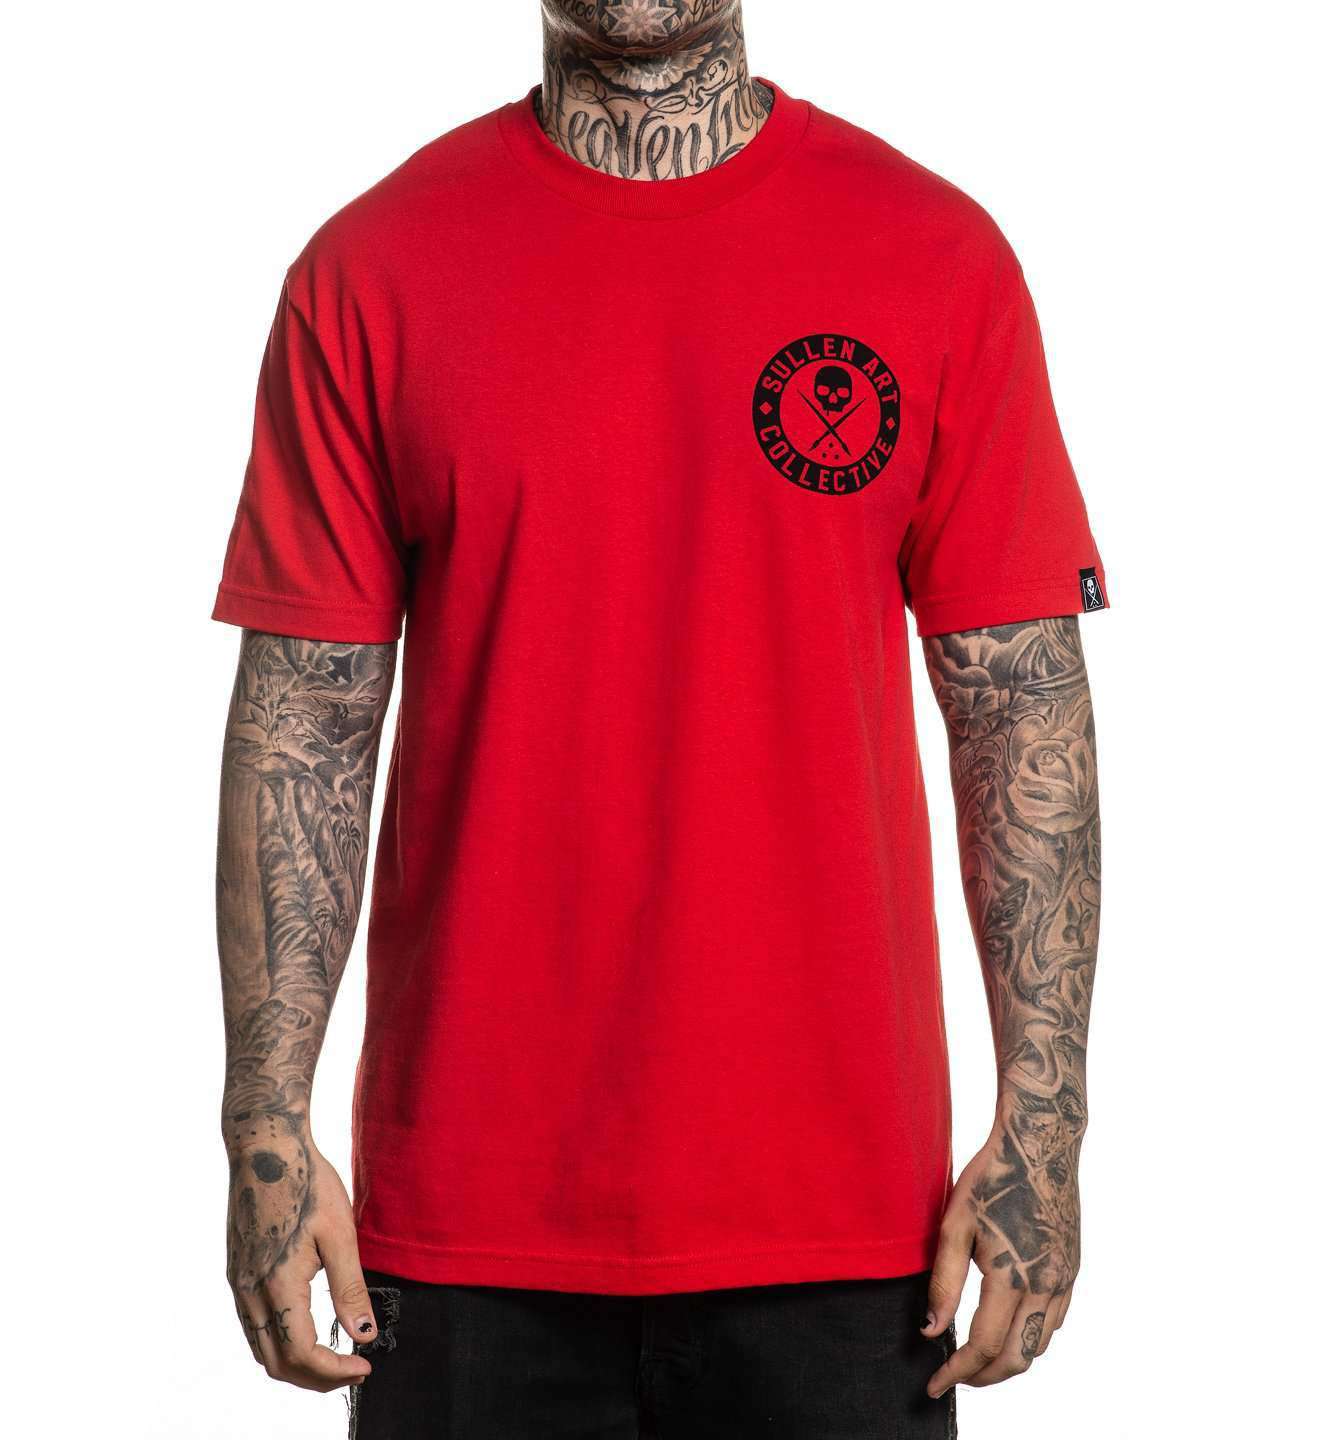 The Classic Red Tee